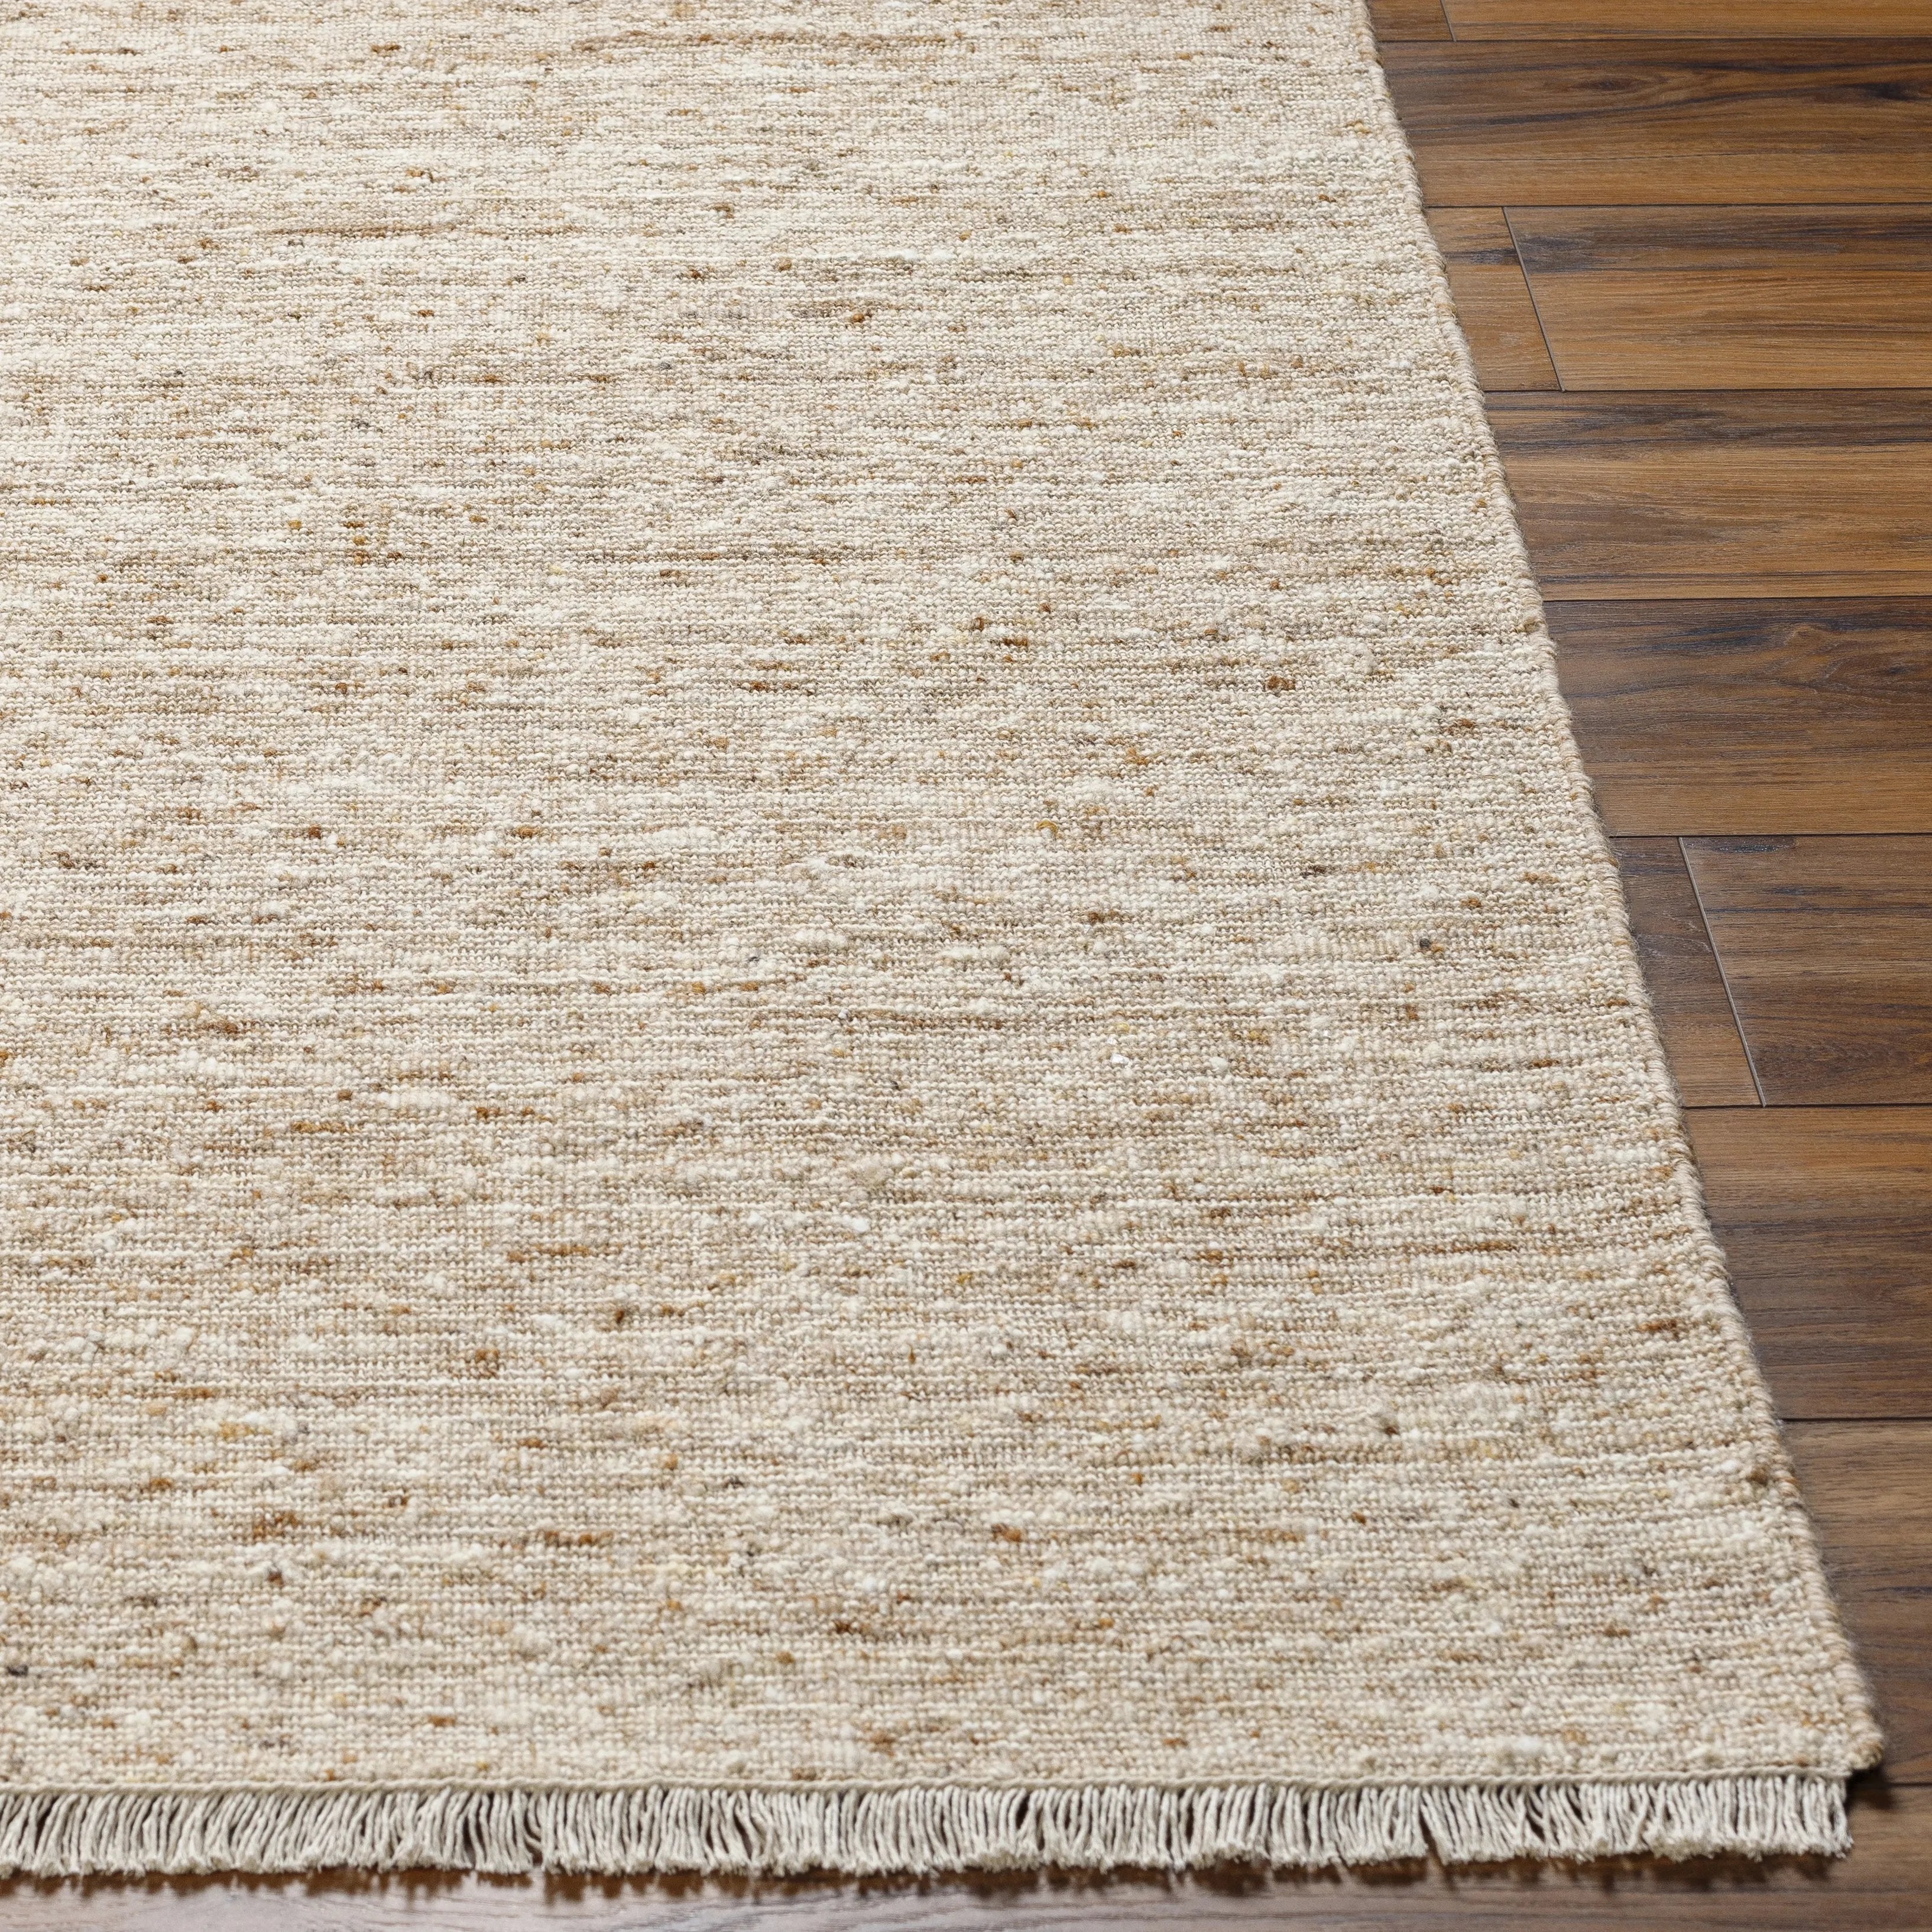 A modern, heathered warm beige look.  This is a great rug if you have other dominant design features in a space like a striking fireplace or standout patterns Amethyst Home provides interior design, new home construction design consulting, vintage area rugs, and lighting in the Alpharetta metro area.